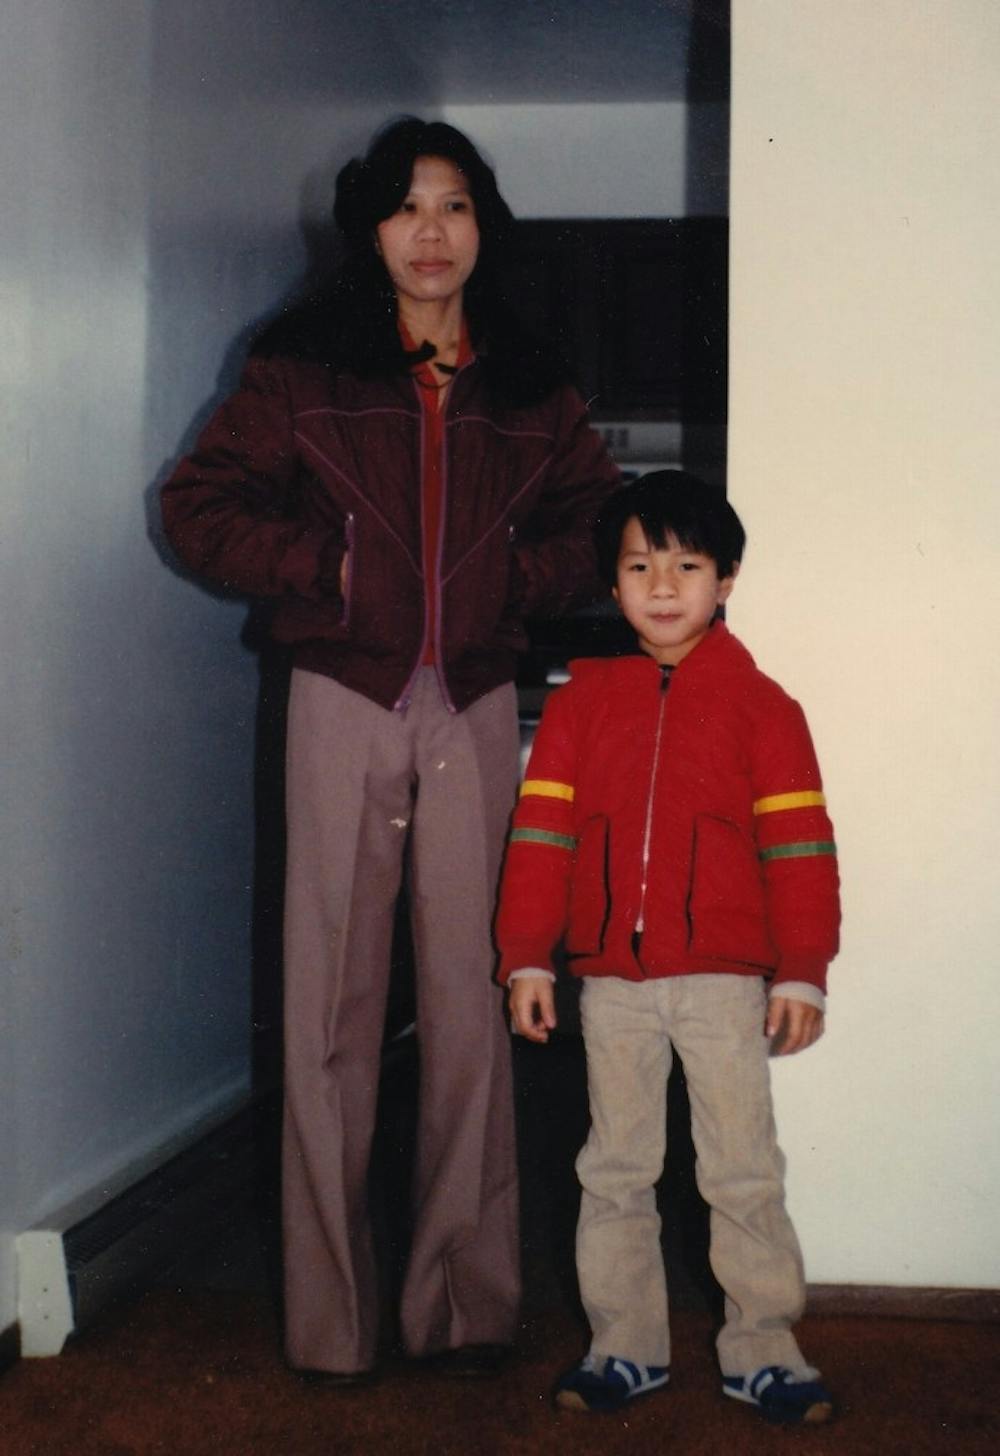 Giap, left, escaped to America when South Vietnam was collapsed in 1975. She raised Tony Nguyen in Seymour, Indiana. They were the first Asian family in Seymour, Ind. Nguyen recently documented his mother's final day of work at the ironing board factory, called "Giap's Last Day at the Ironing Board Factory."